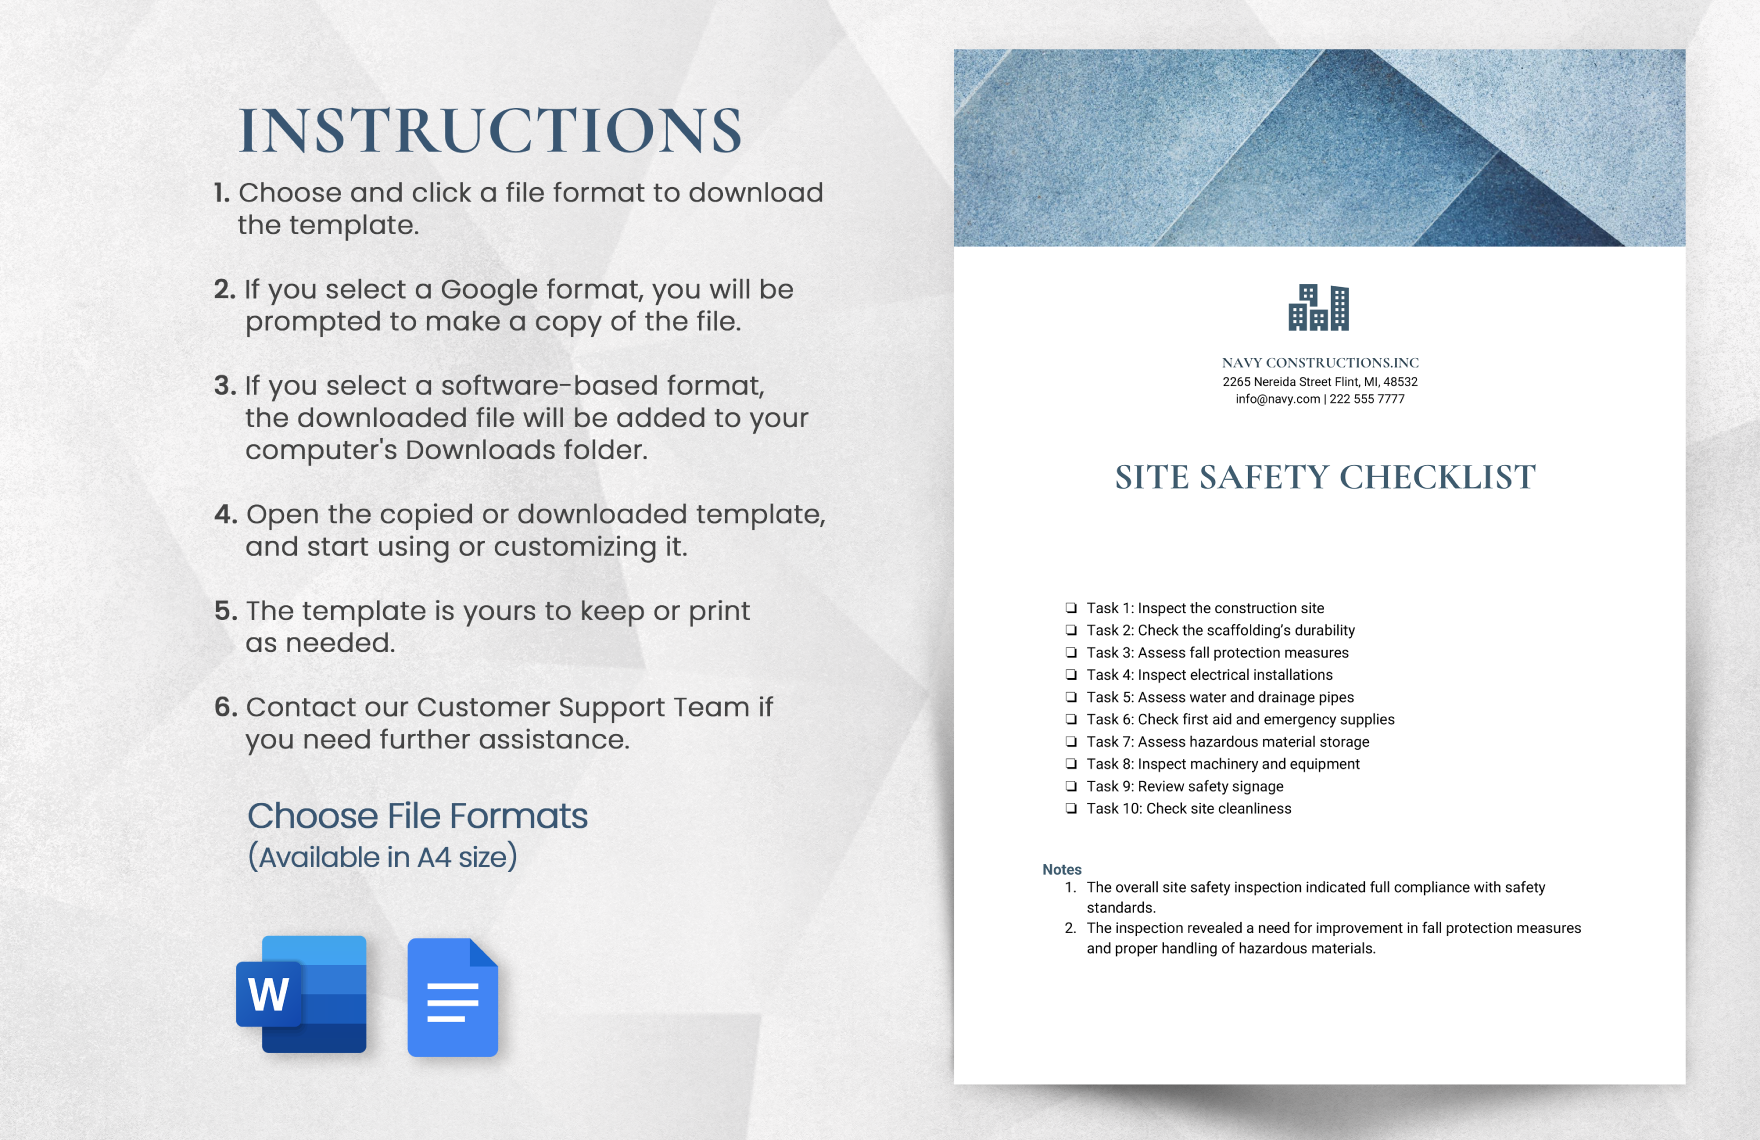 Site Safety Inspection Checklist Template